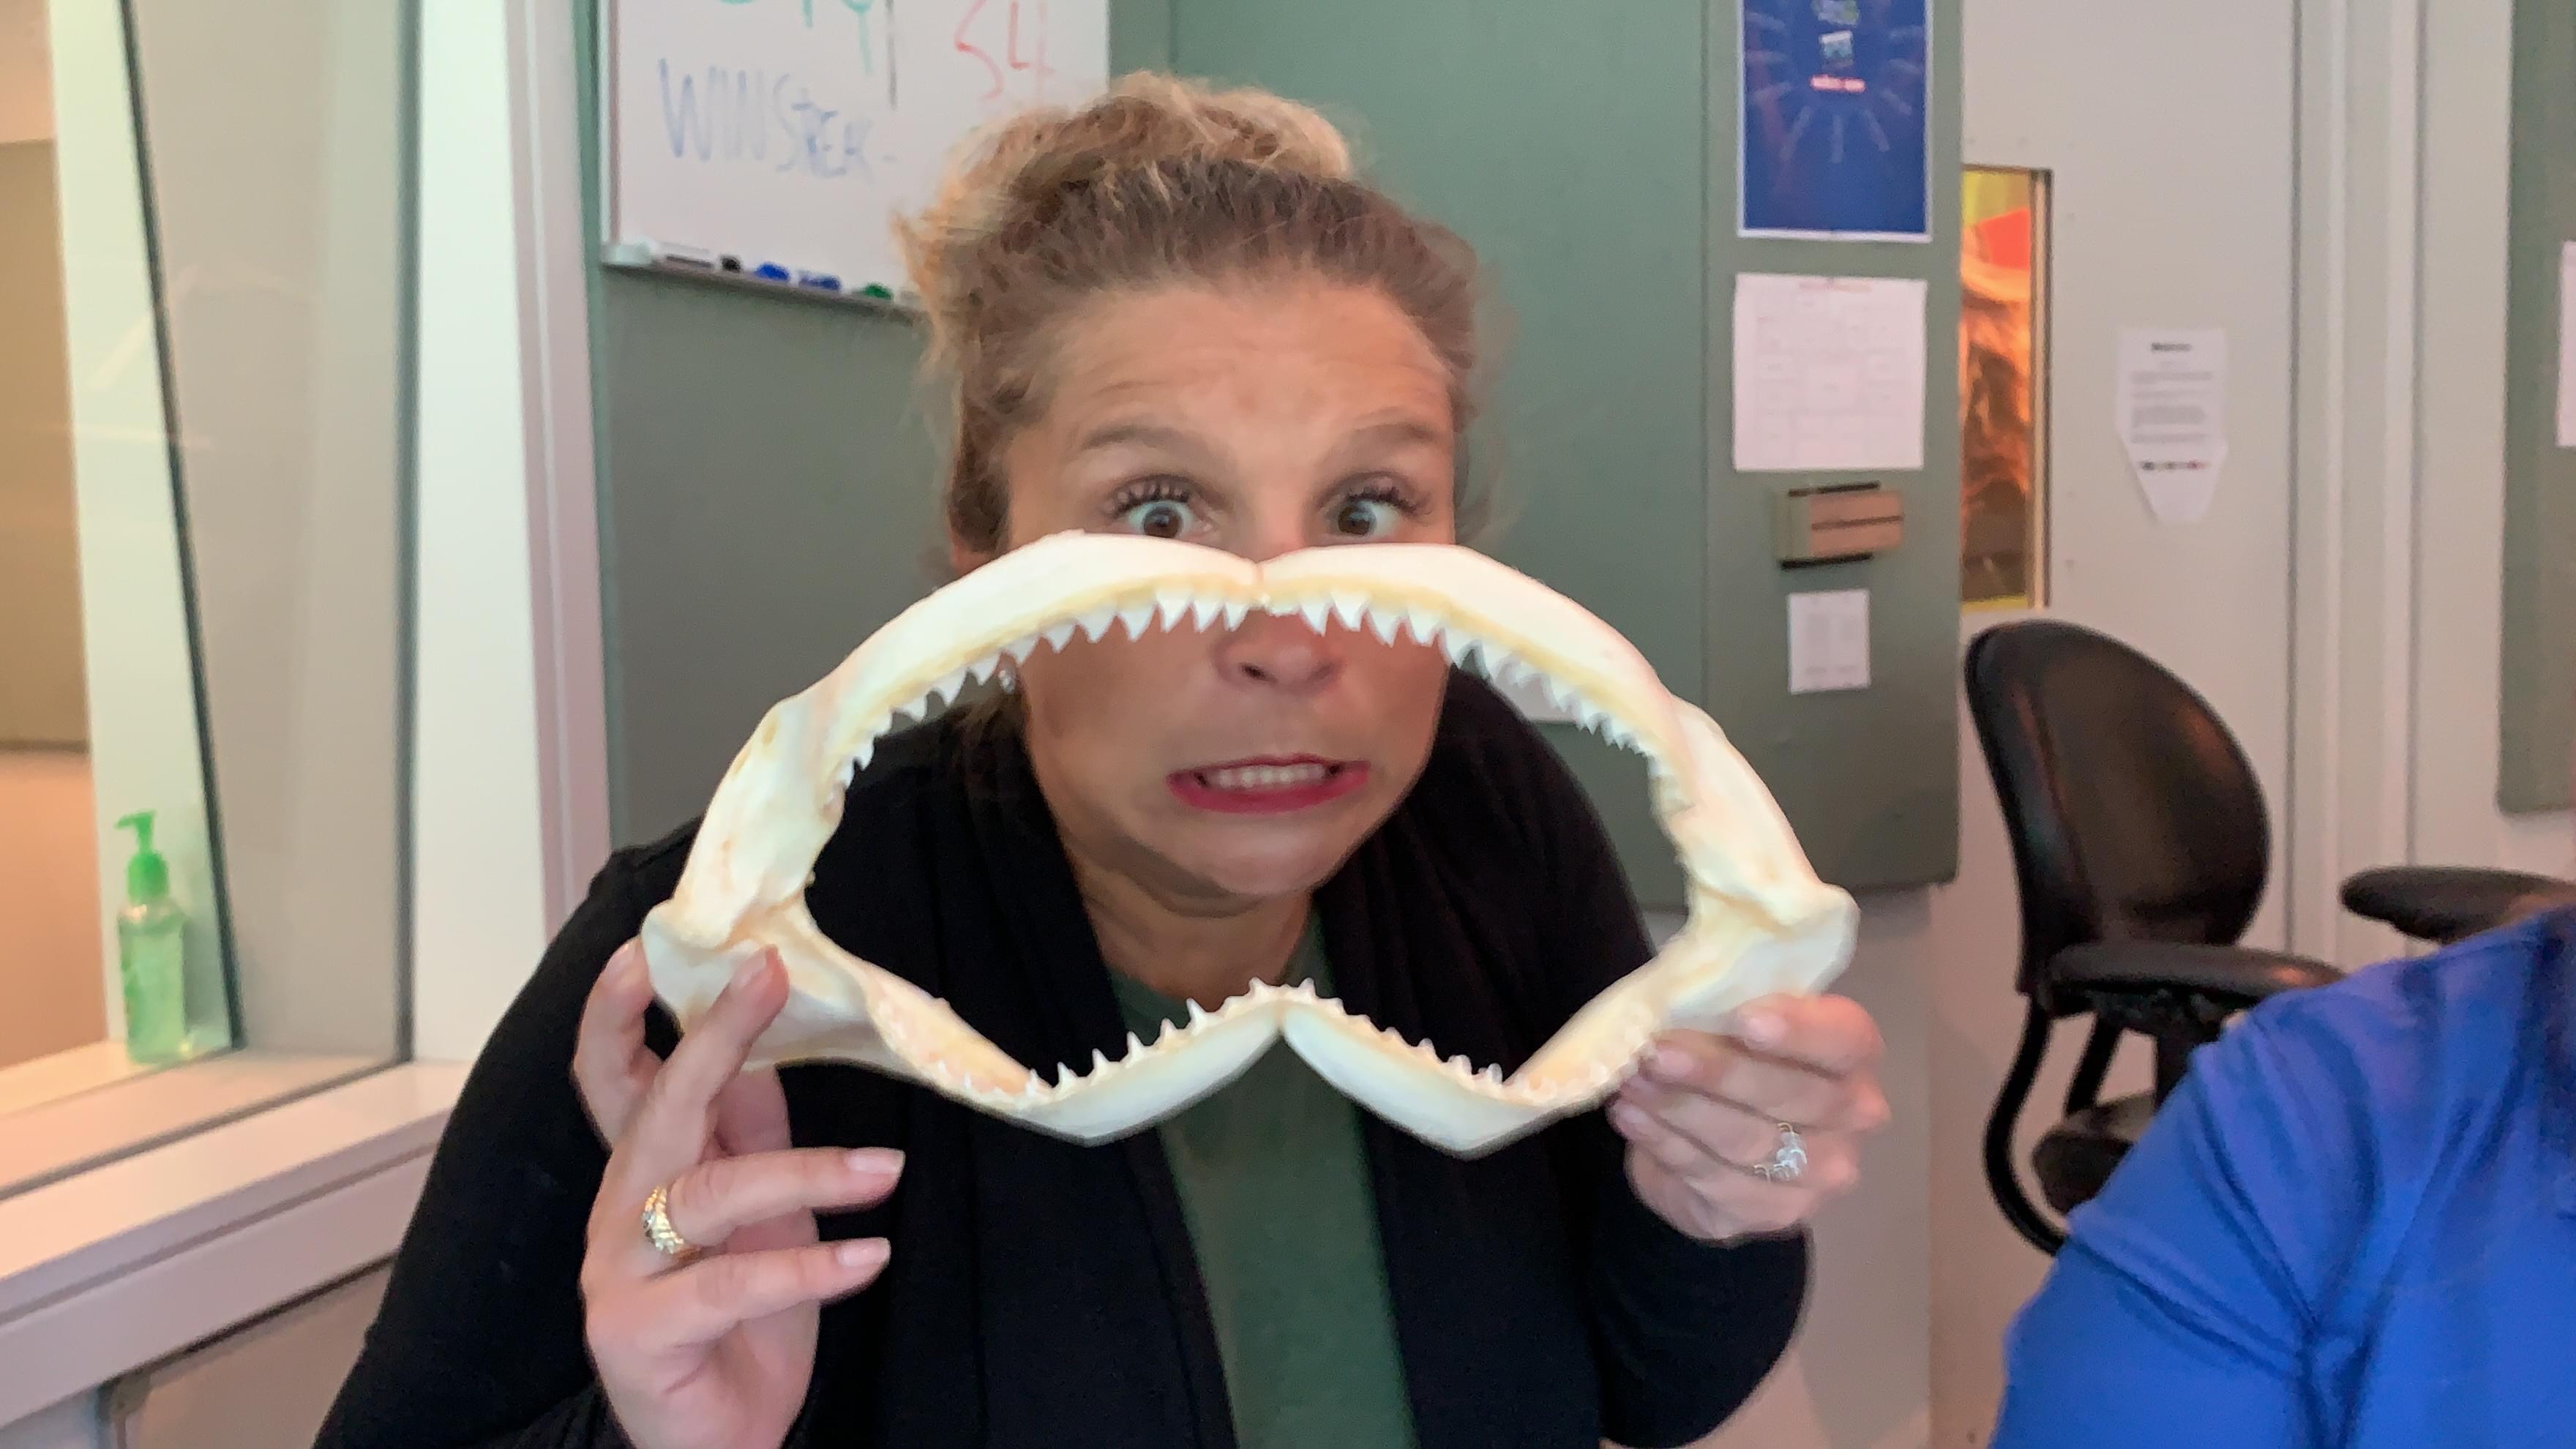 60 Seconds Behind the Scenes- Tina and Sandy from the Maritime Aquarium talk sharks!